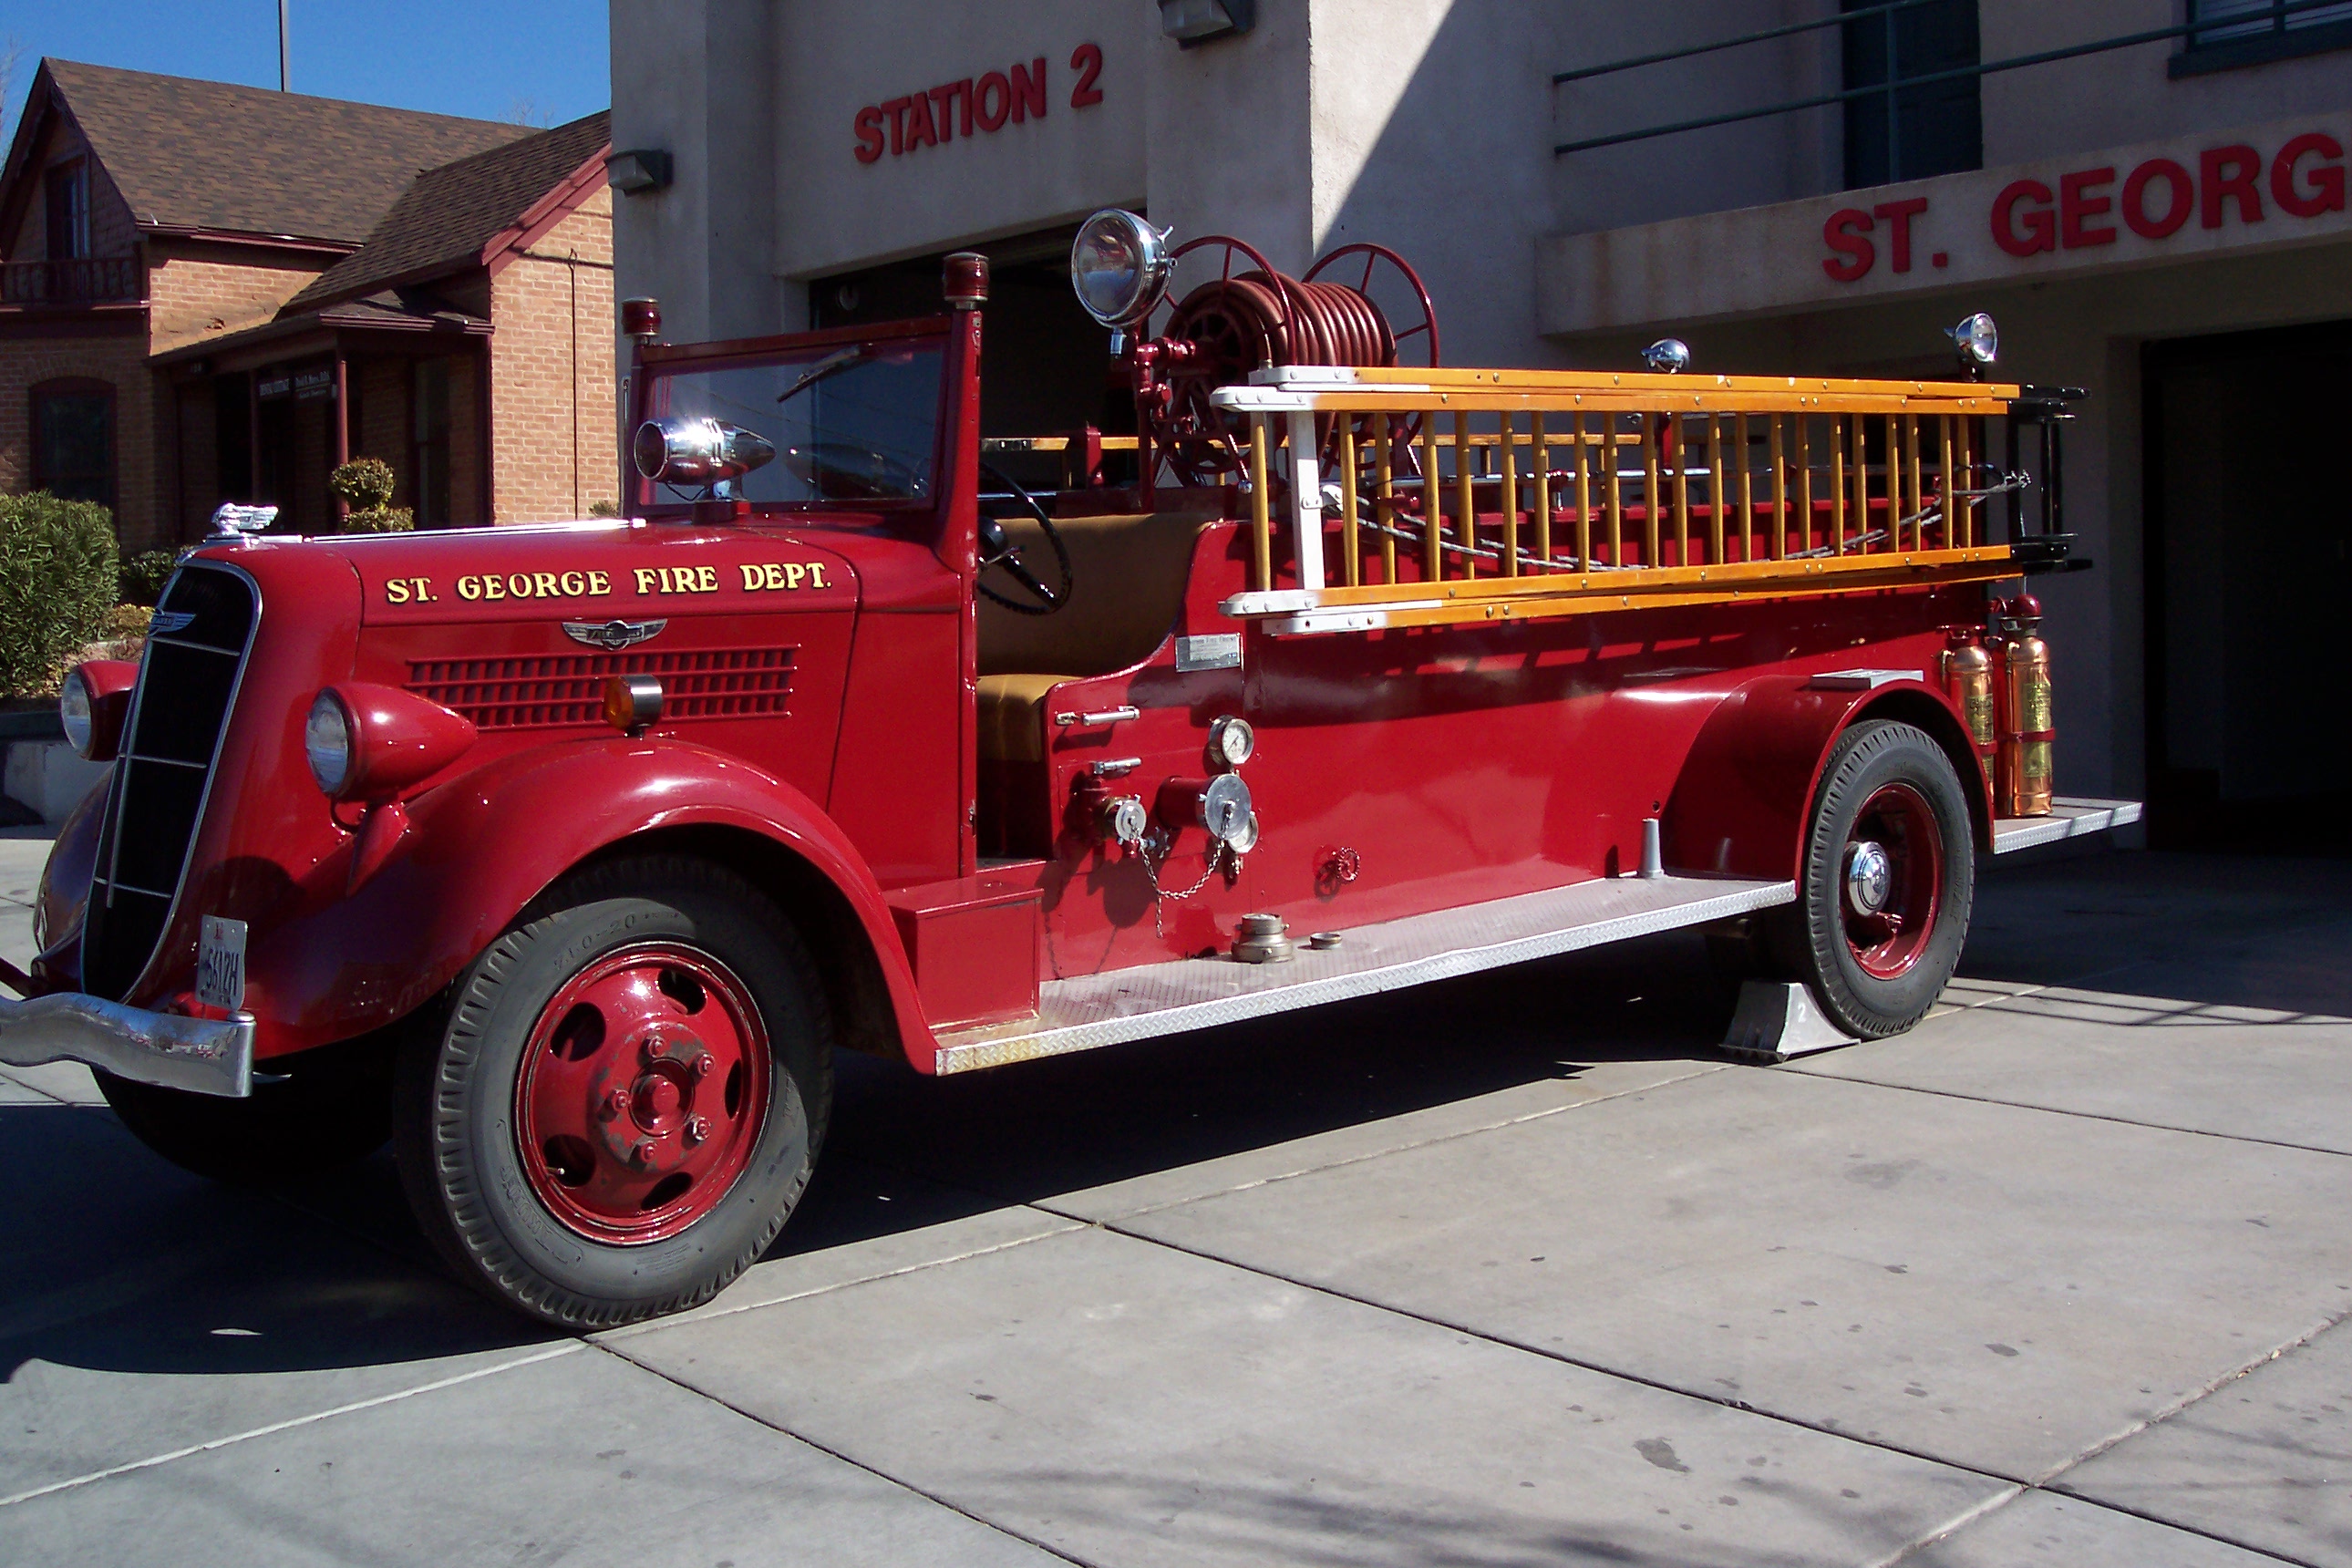 1936 Studebaker (first fire engine in St. George)